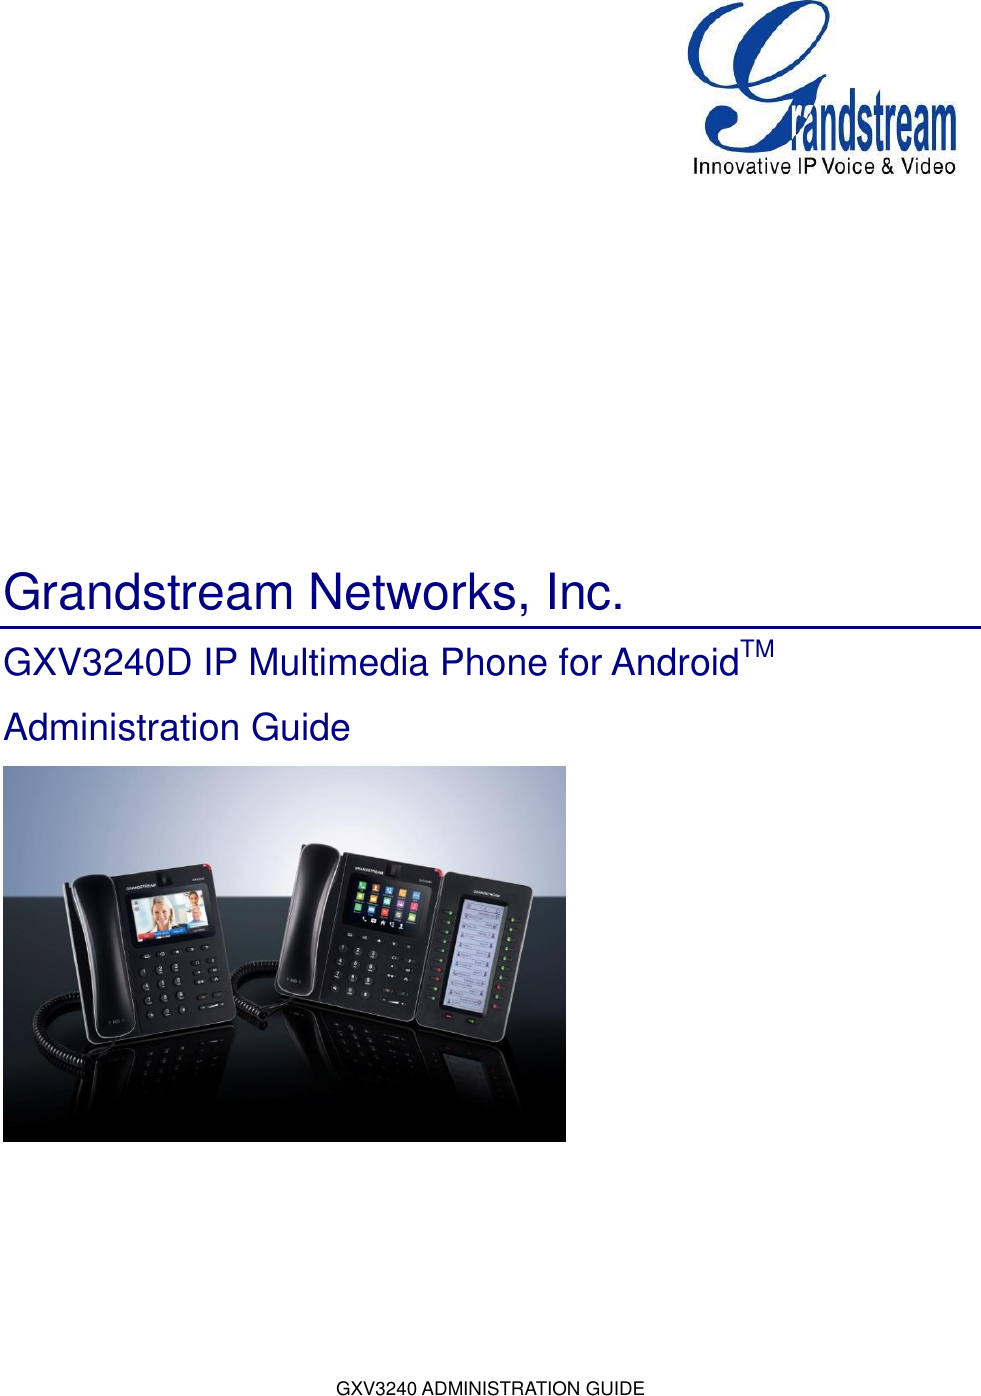 GXV3240 ADMINISTRATION GUIDE        Grandstream Networks, Inc. GXV3240D IP Multimedia Phone for AndroidTM Administration Guide 